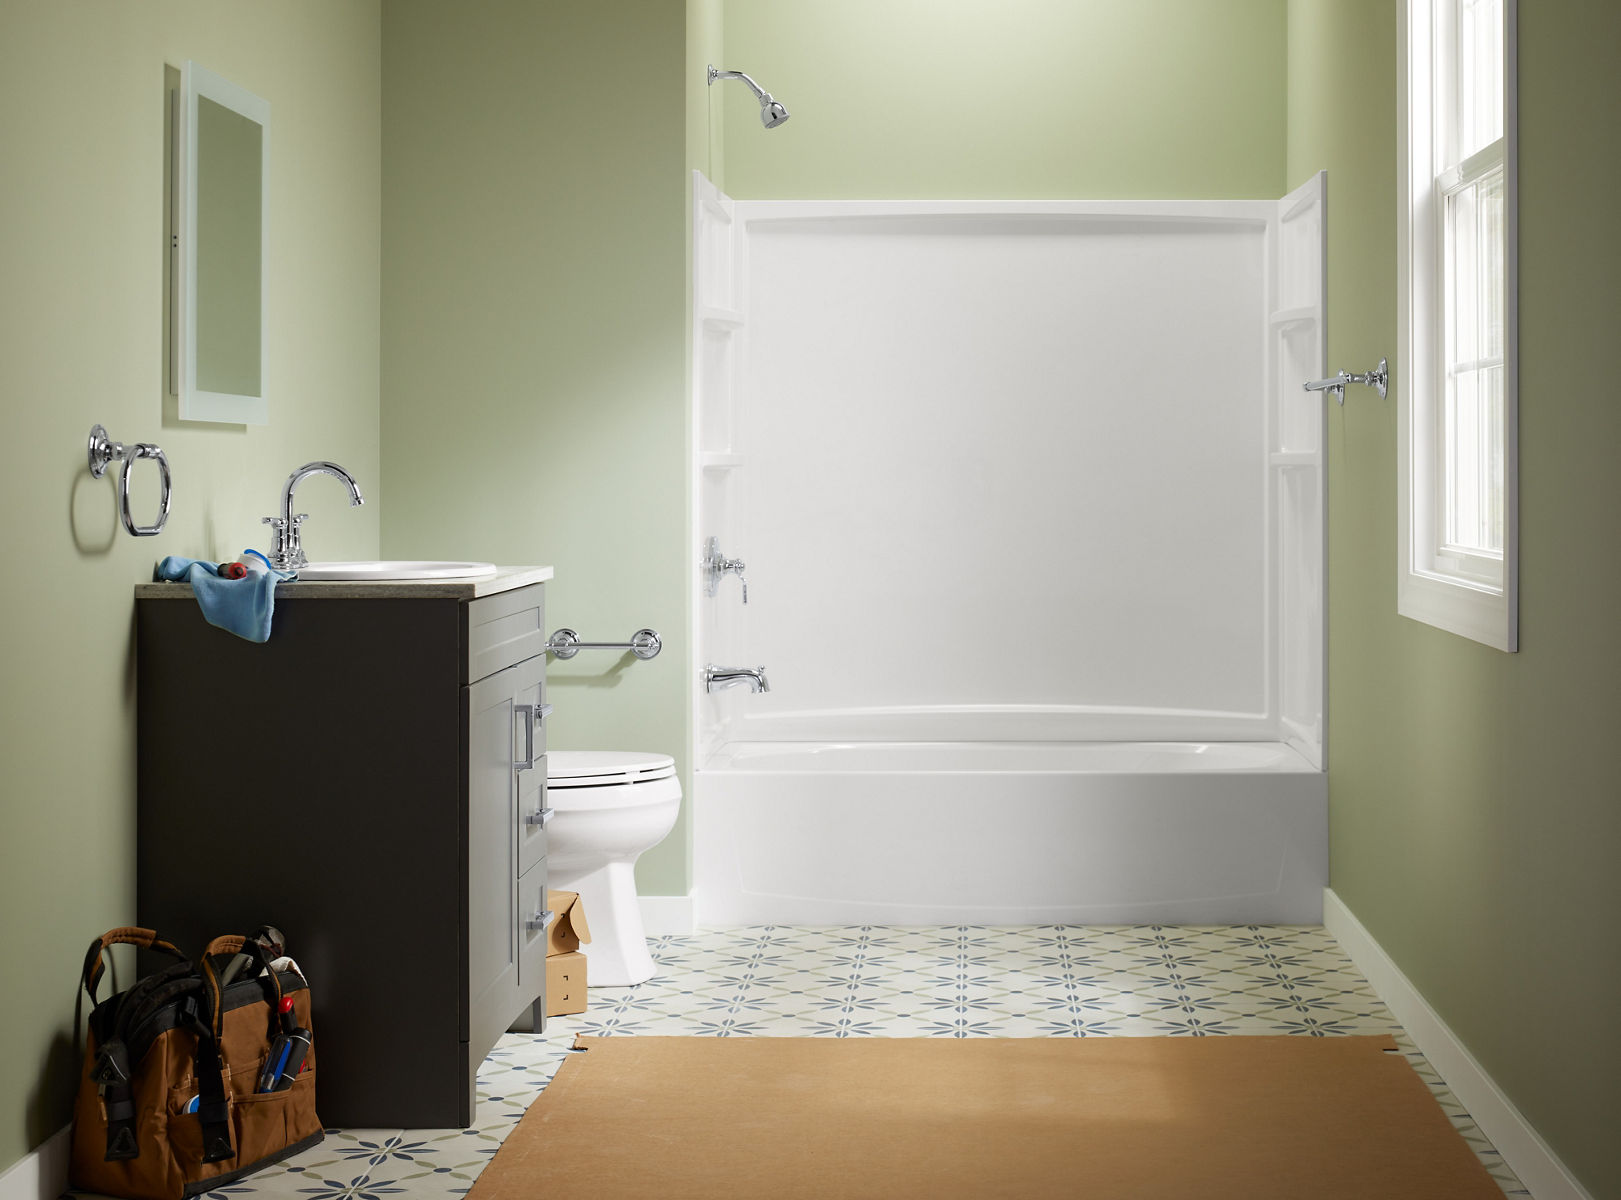 A white bathtub with white shower surround in a room with light green walls and tile flooring.